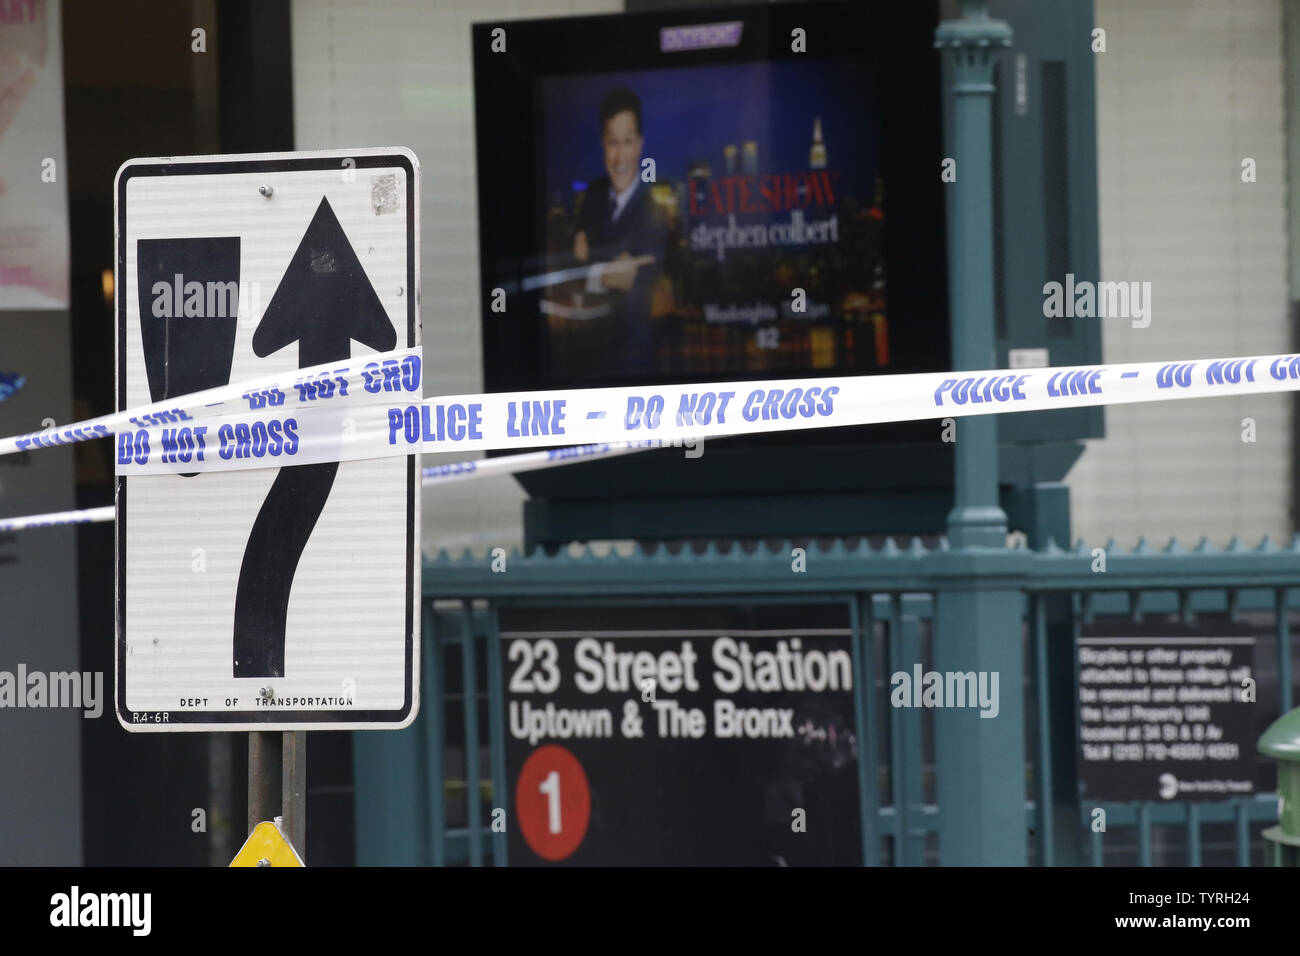 Police Line Do Not Cross tape remains up one day after a powerful explosion from a bomb went off on West 23rd Street in Manhattan around 8:30 p.m. on Saturday, injuring 29 people, shattering windows and prompting widespread street closures on West 23rd Street on September 18, 2016 in New York City. Many of the injuries were caused by shrapnel from the explosion. The injuries were not life-threatening, though one person was seriously hurt, officials said.   Photo by John Angelillo/UPI Stock Photo